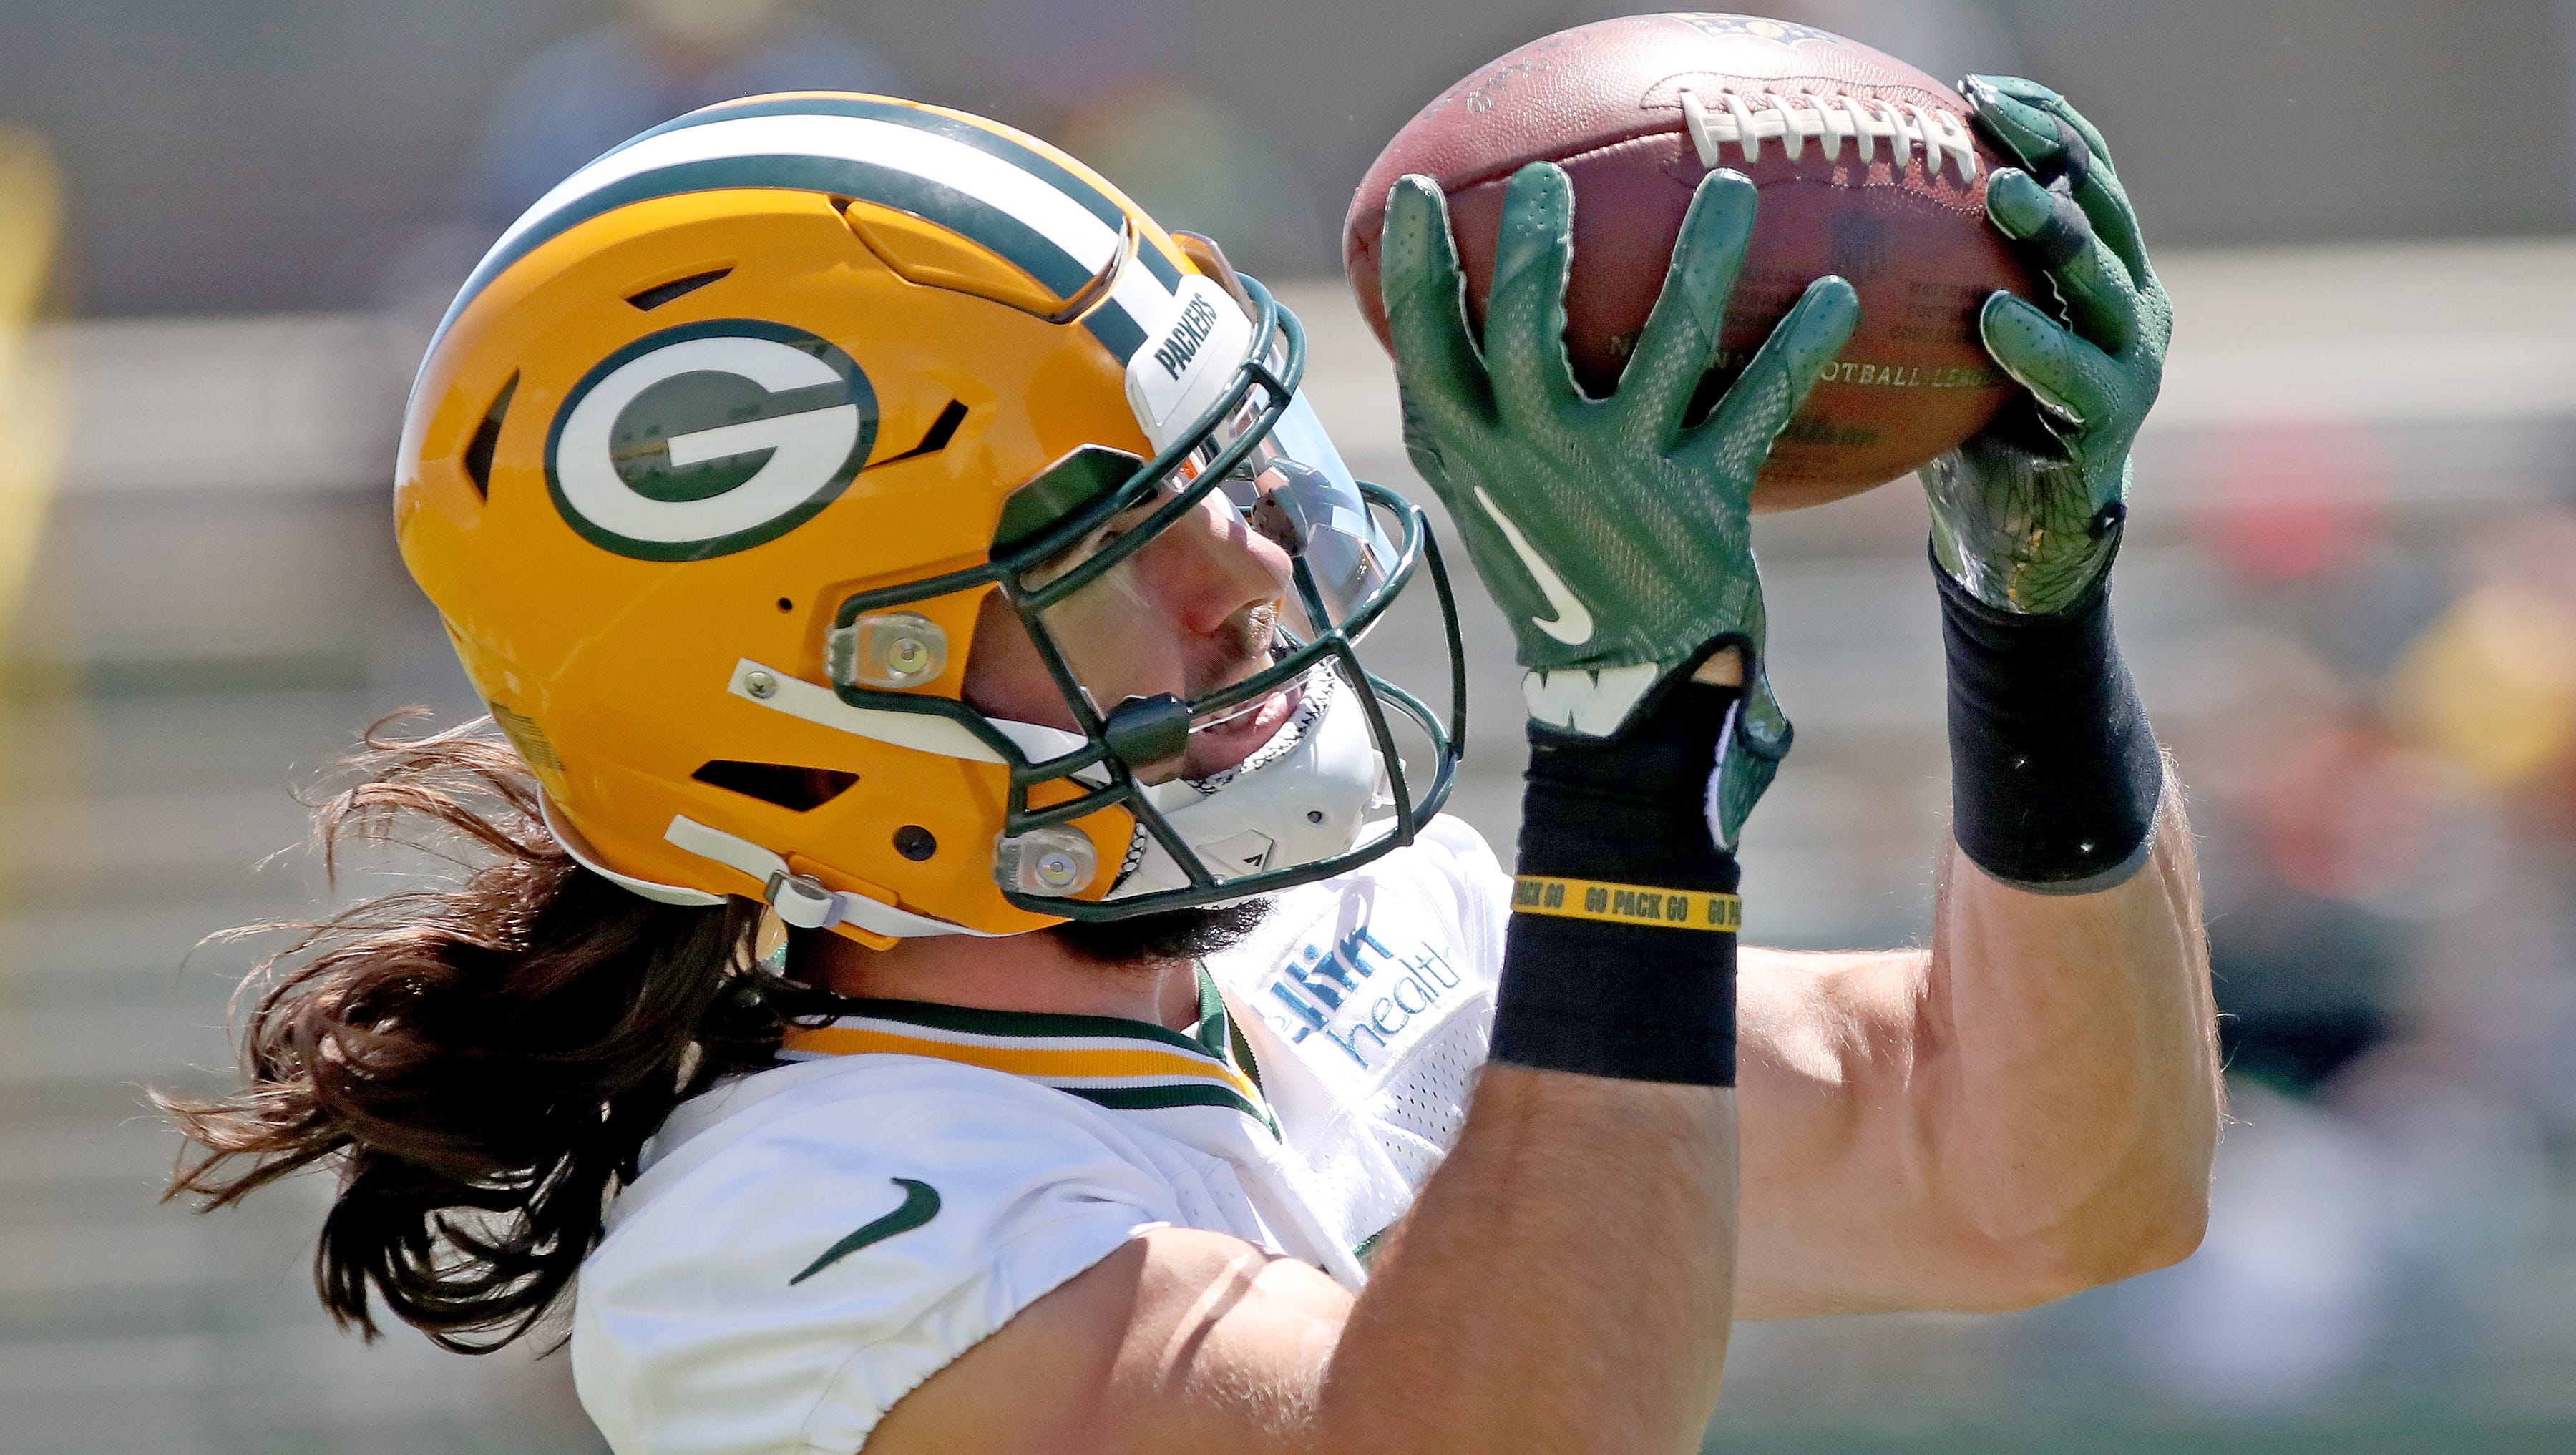 Green Bay Packers wide receiver Jake Kumerow (16) during Green Bay Packers minicamp at Ray Nitschke Field Wednesday, June 13, 2018 in Ashwaubenon, Wis.